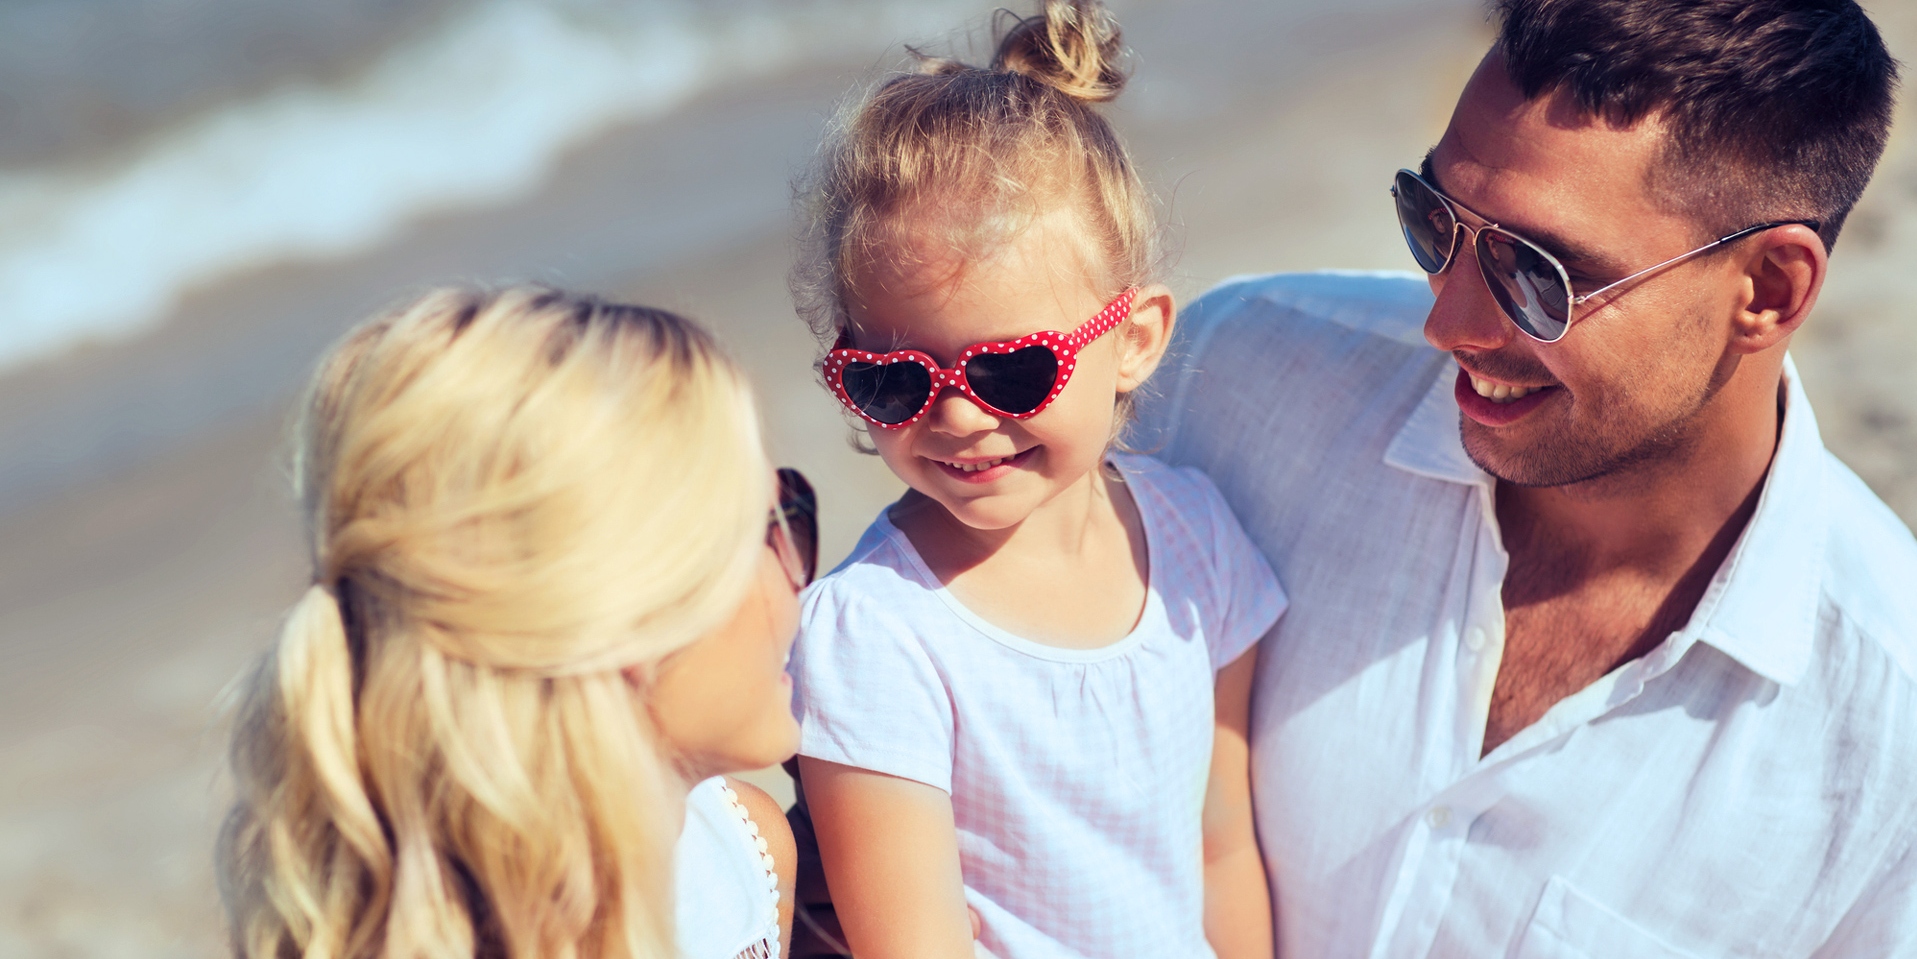 More than just cool: sun protection for children's eyes 